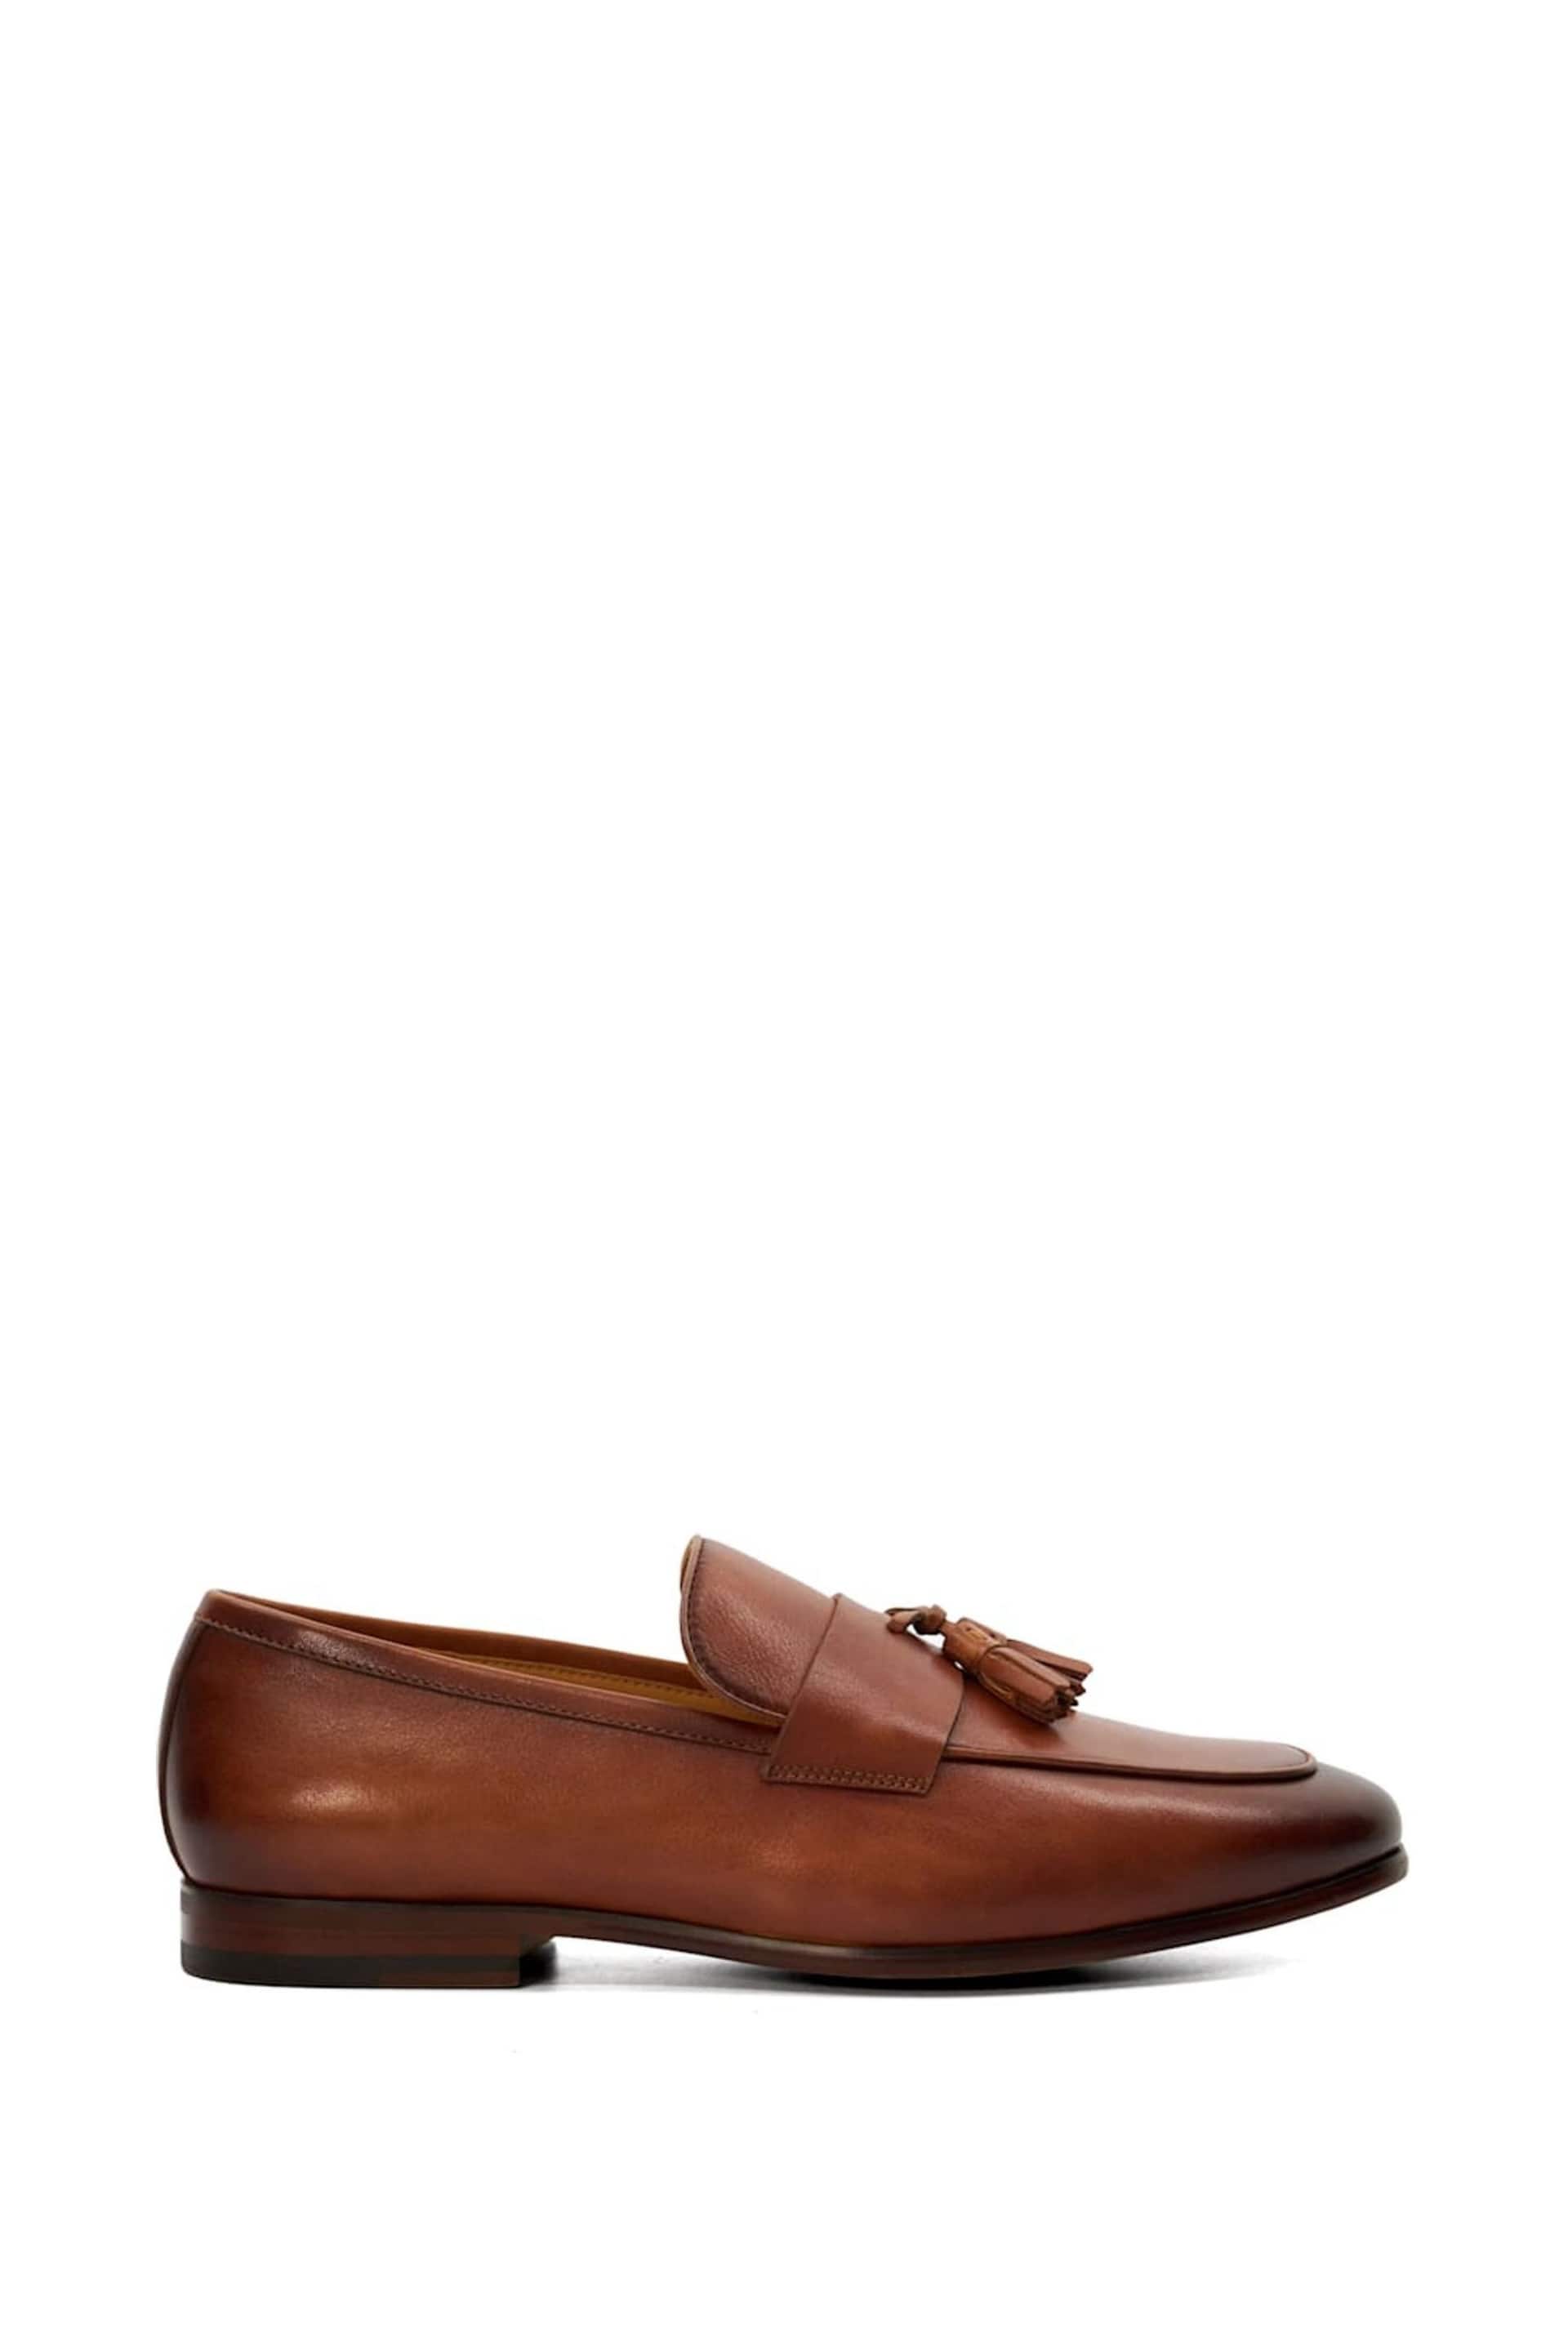 Dune London Brown Saxxton Tassel Loafers - Image 1 of 7